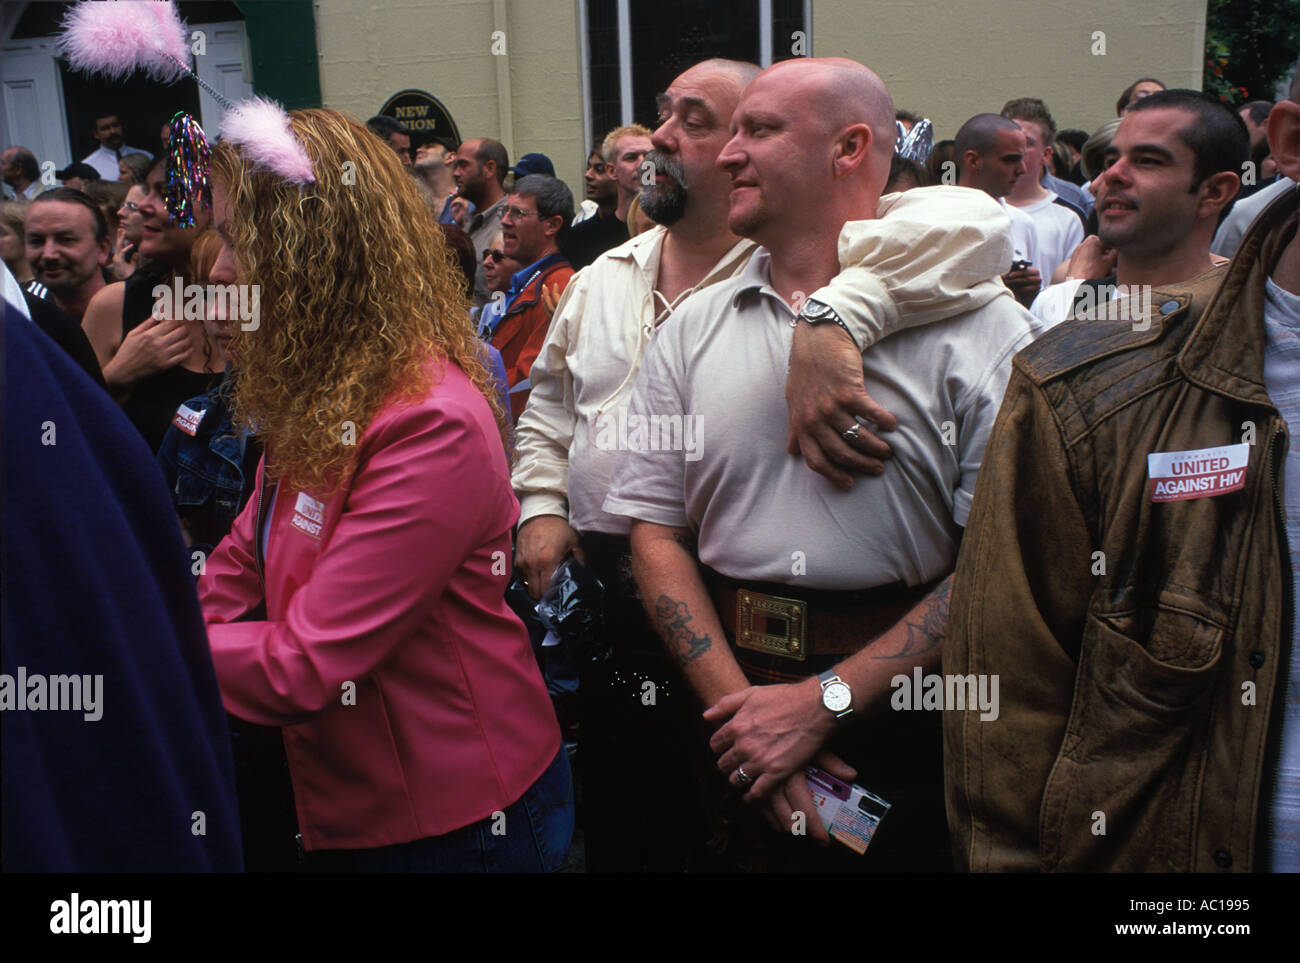 Gay Festival Manchester Pride Festival 1990s UK. Two big men known as 'bears' in crowded street watching parade. LGBT, LGBTQ, 1990s, 90s, 1999. Stock Photo